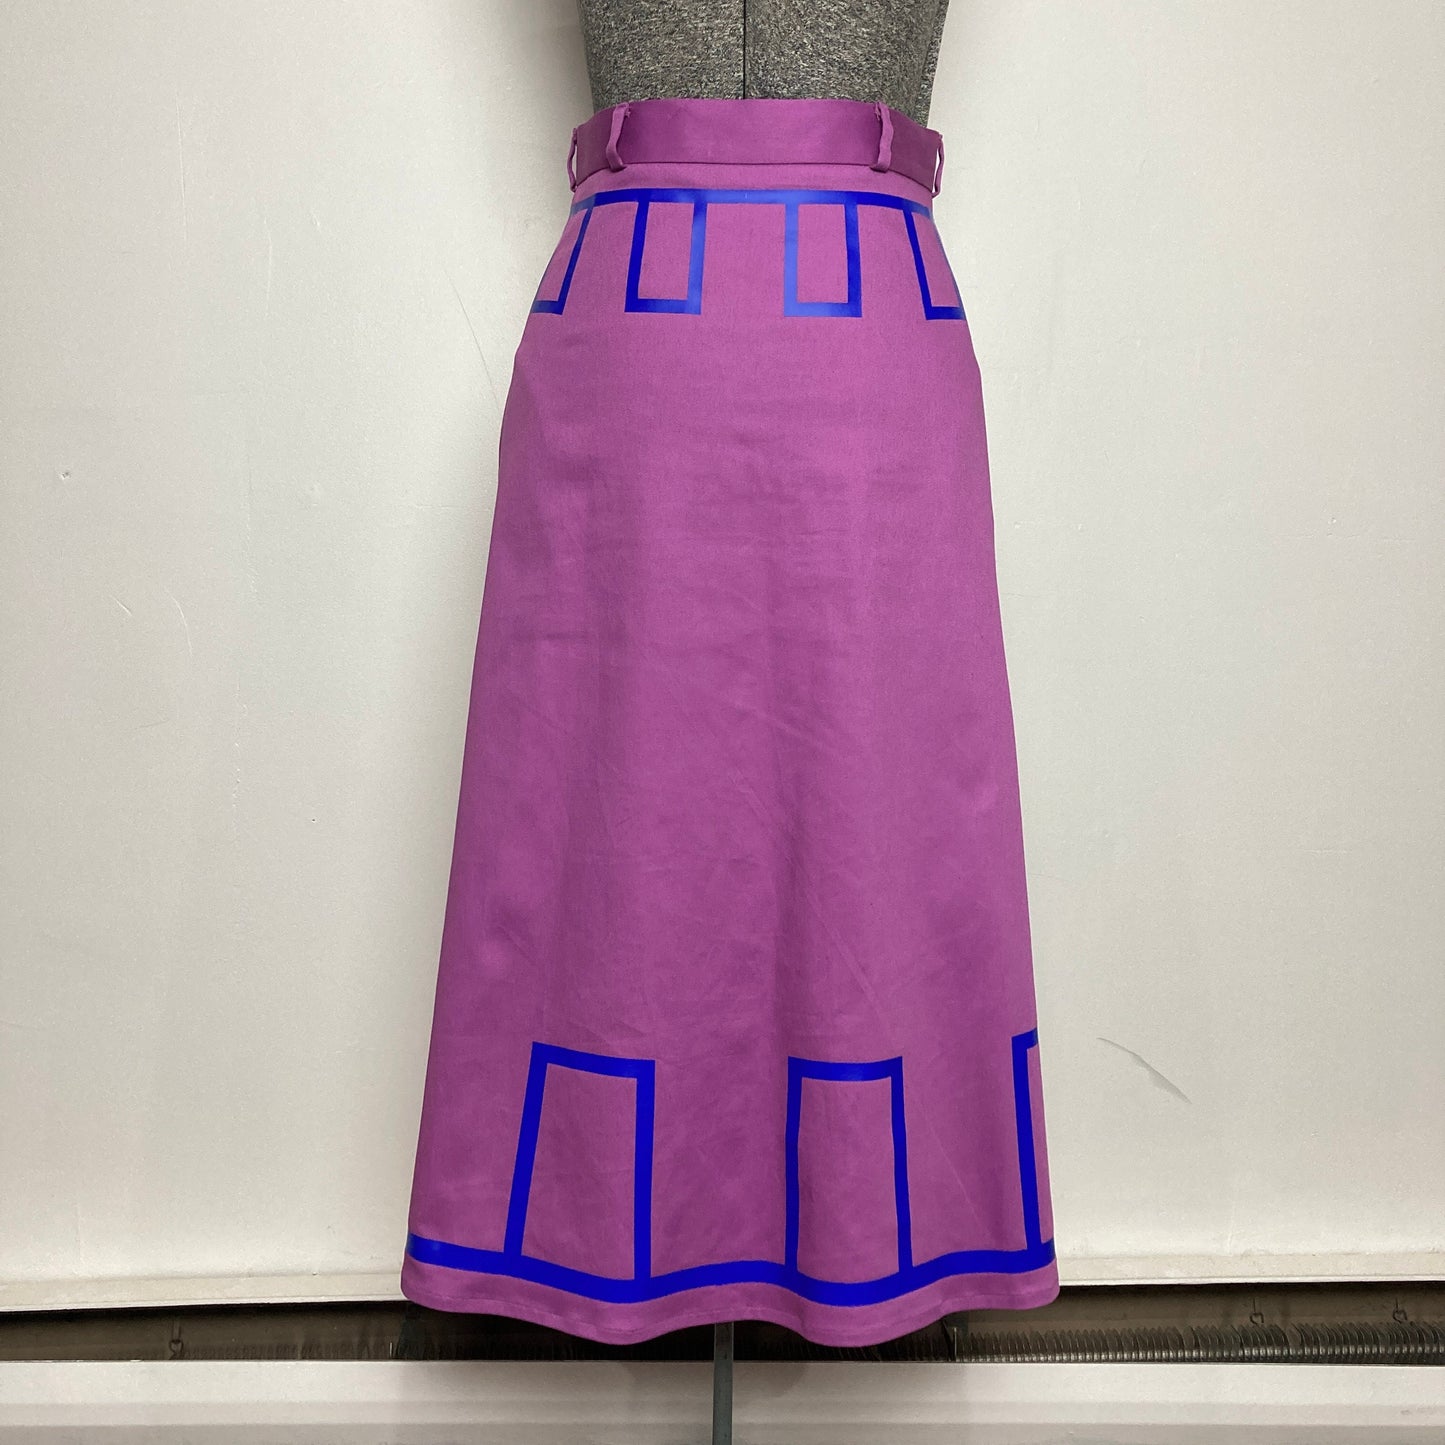 Simple A-Line Skirt sewing Pattern/Downloadable PDF File and Tutorial Book